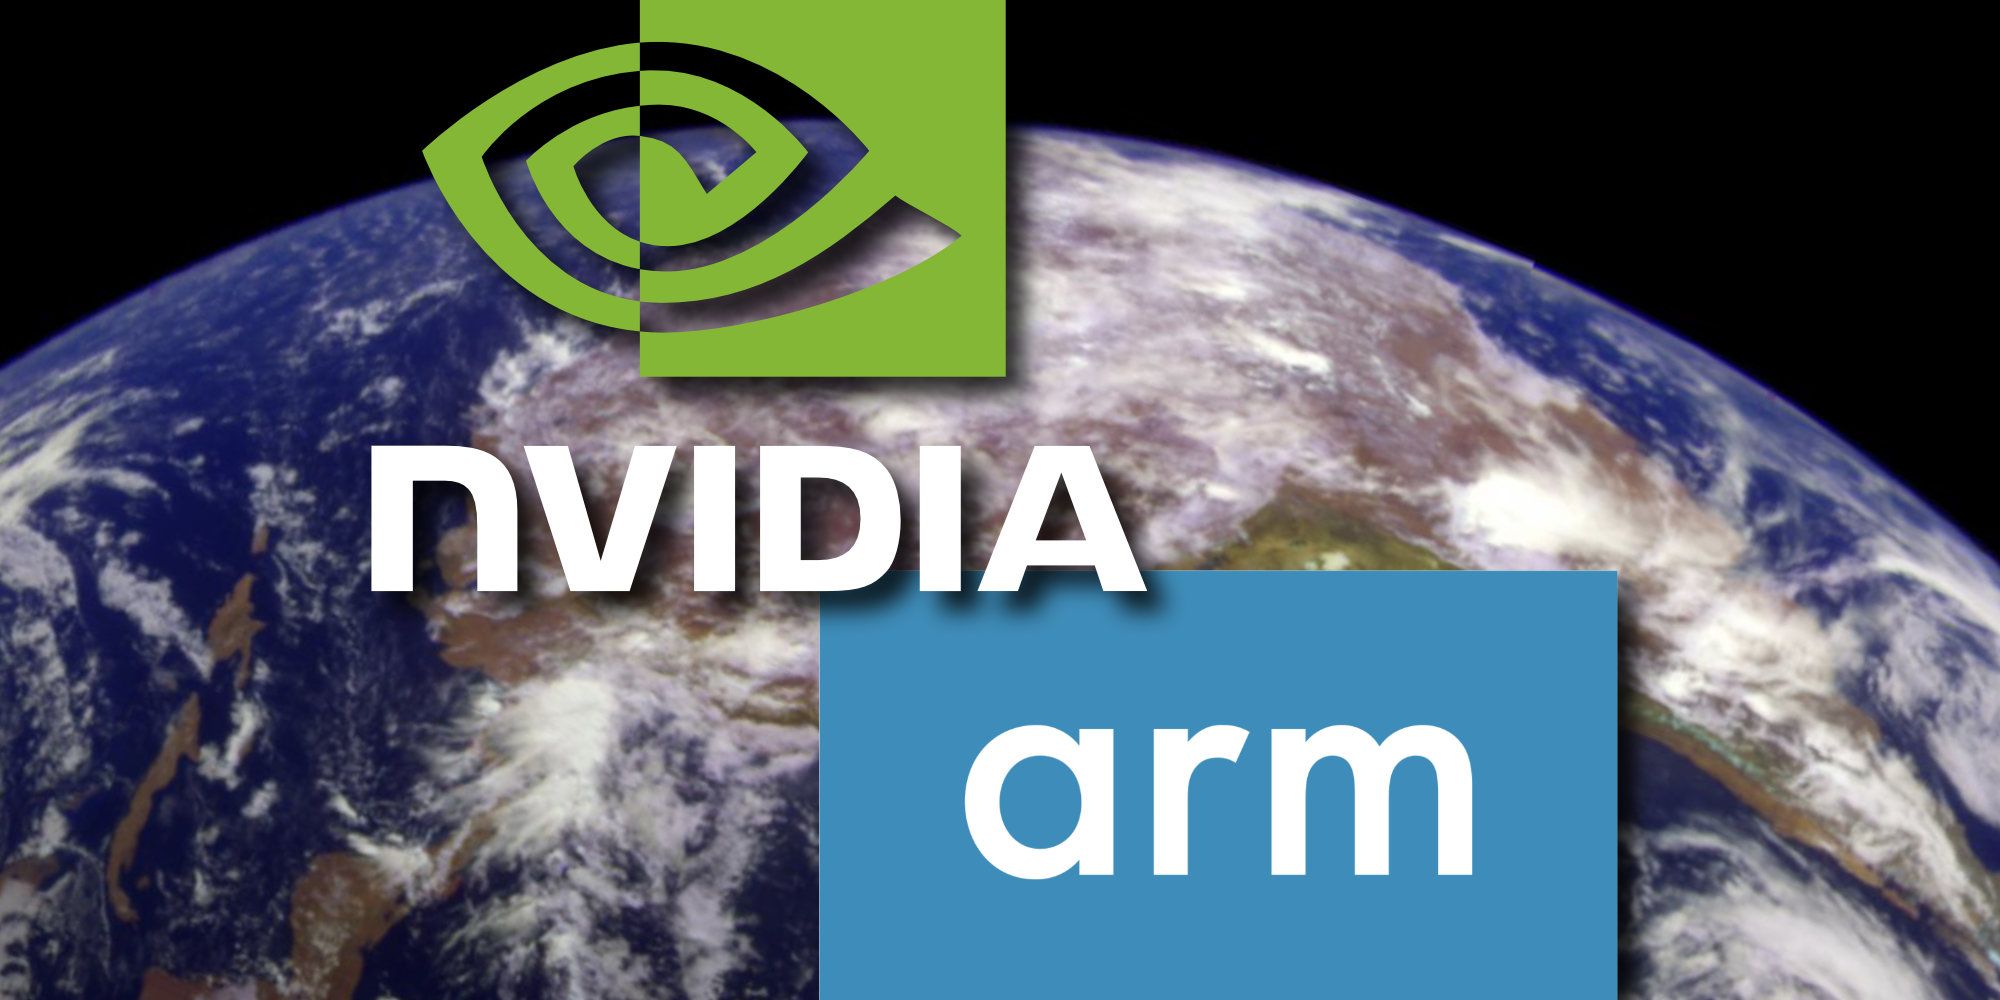 Nvidia Just Bought Arm What Will The Deal Mean For The GPU Market